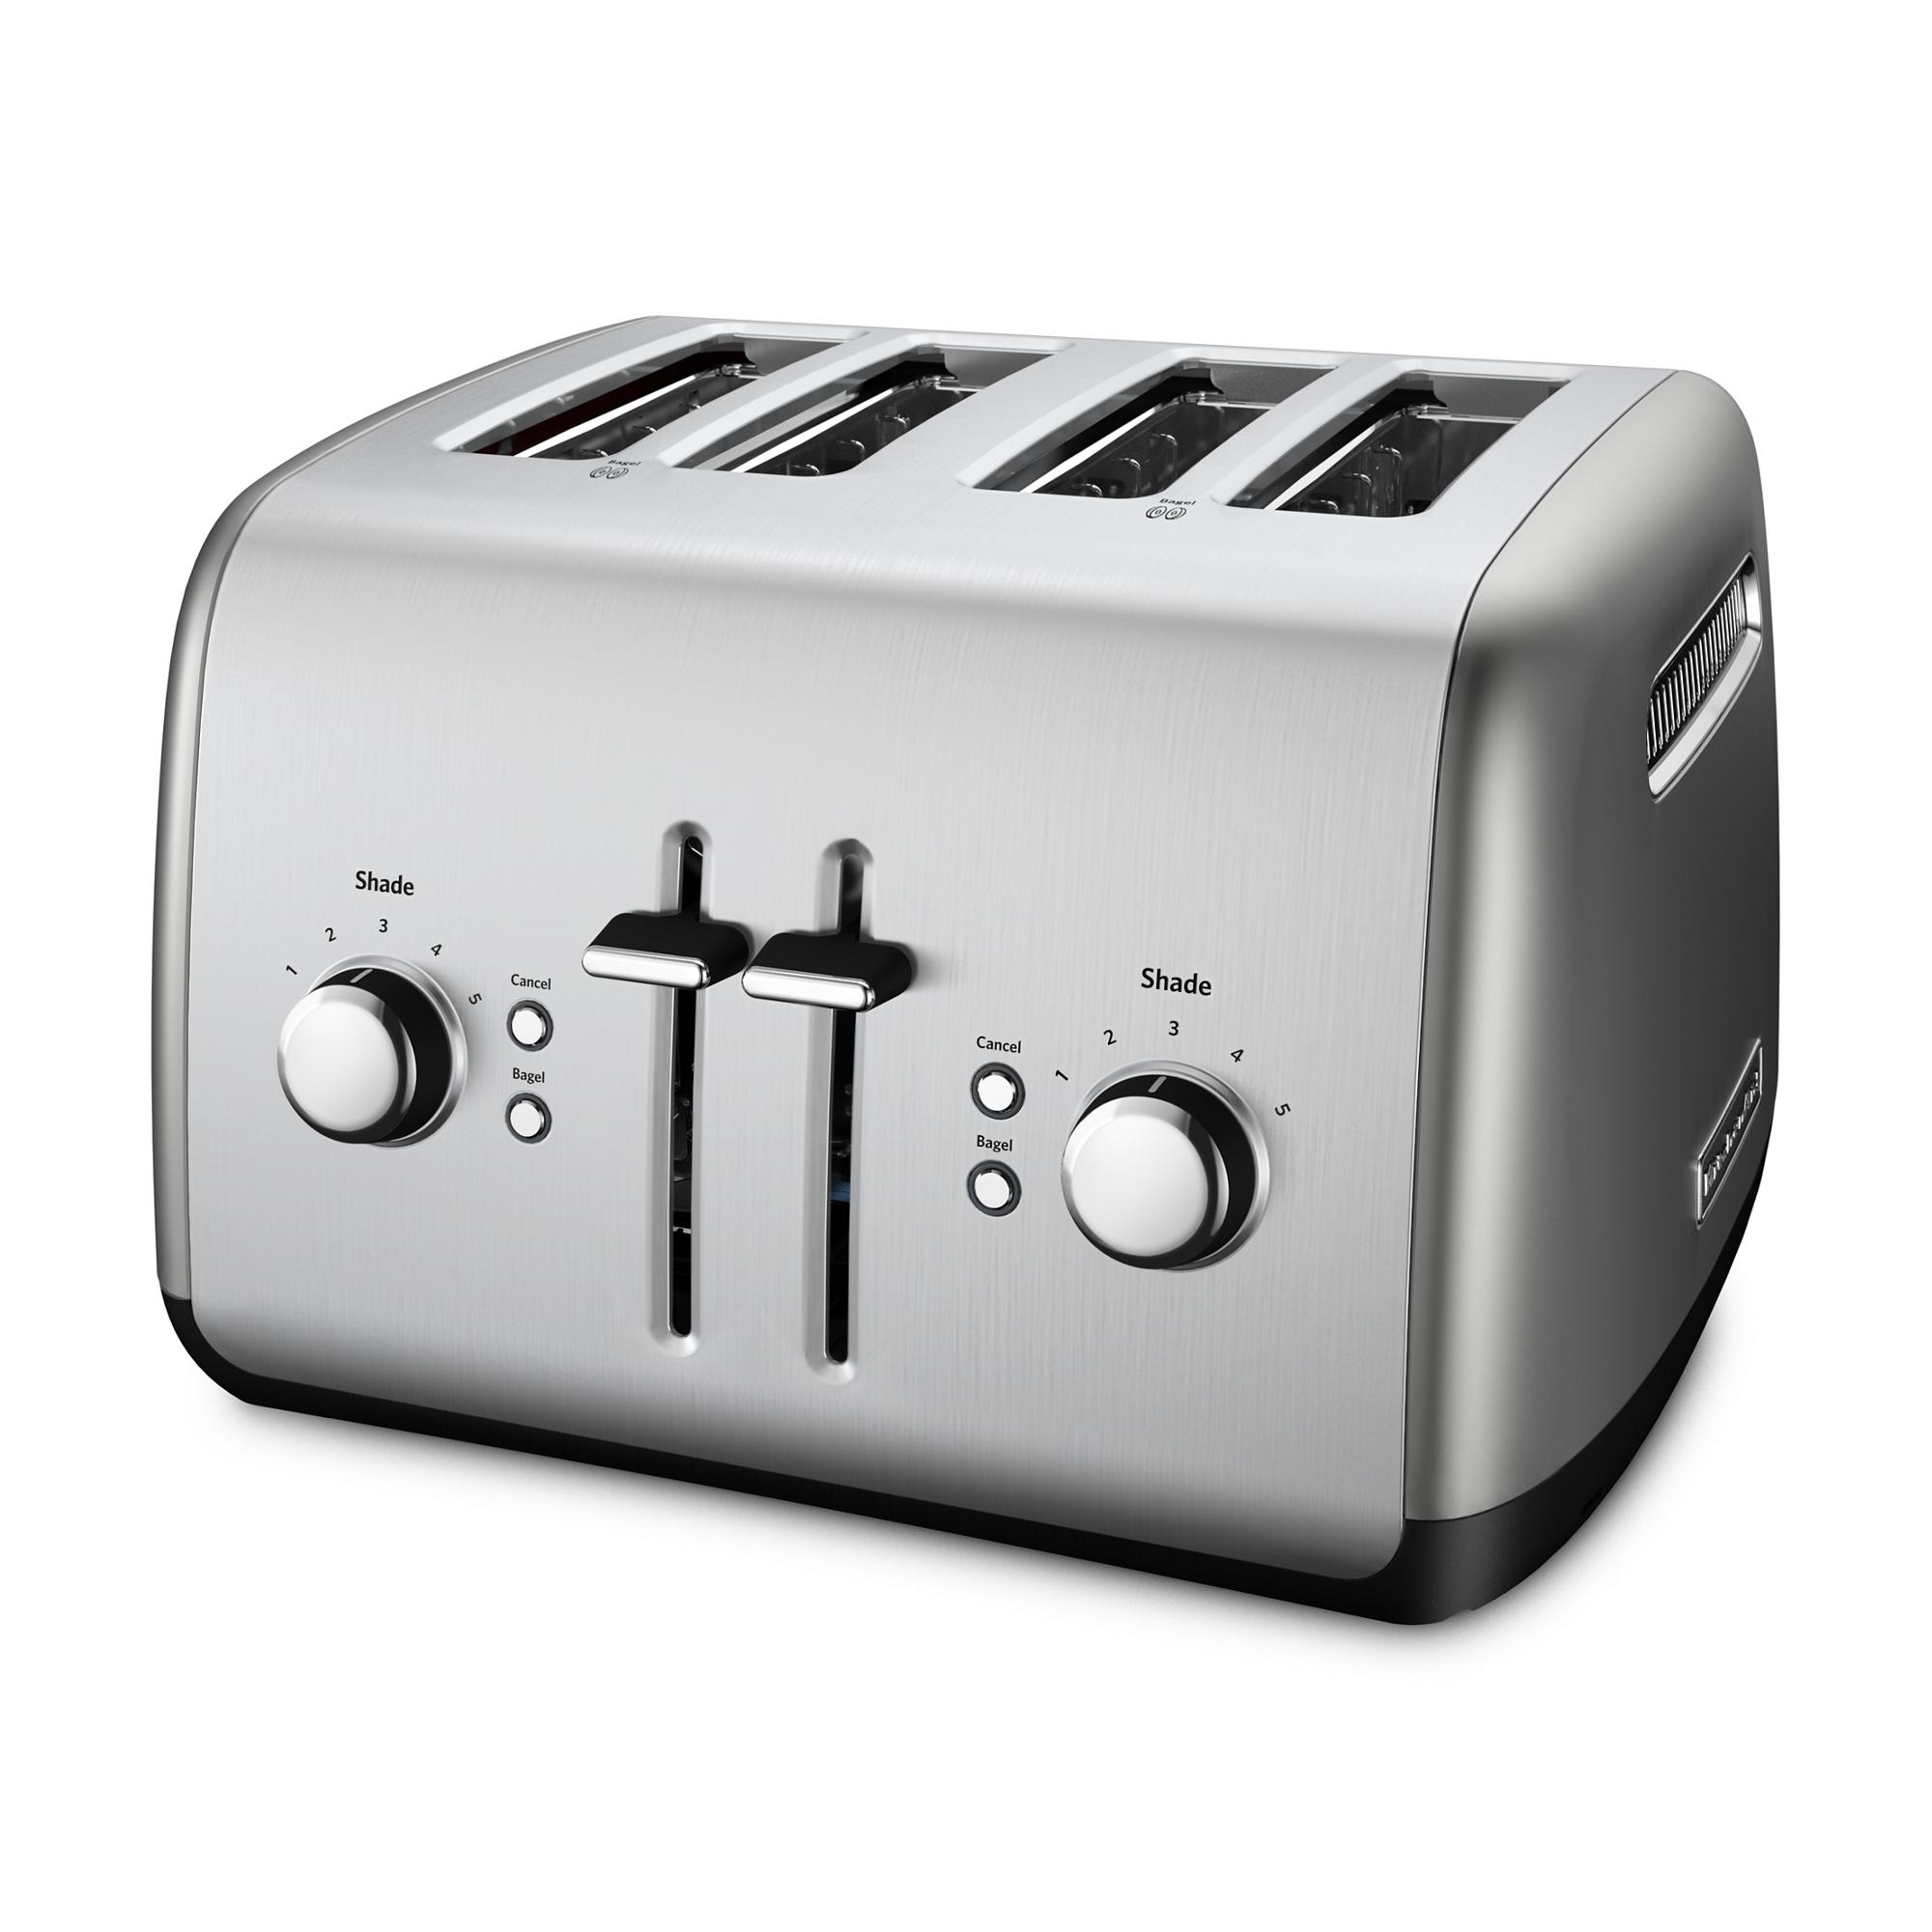  Swan Nordic Toaster 4 Slice with Extra Wide Slots for Bagels,  Waffles, Breads, Cancel, Defrost and Bagel Function, 6 Brown Settings,  Slate Grey (ST14620GRYN): Home & Kitchen